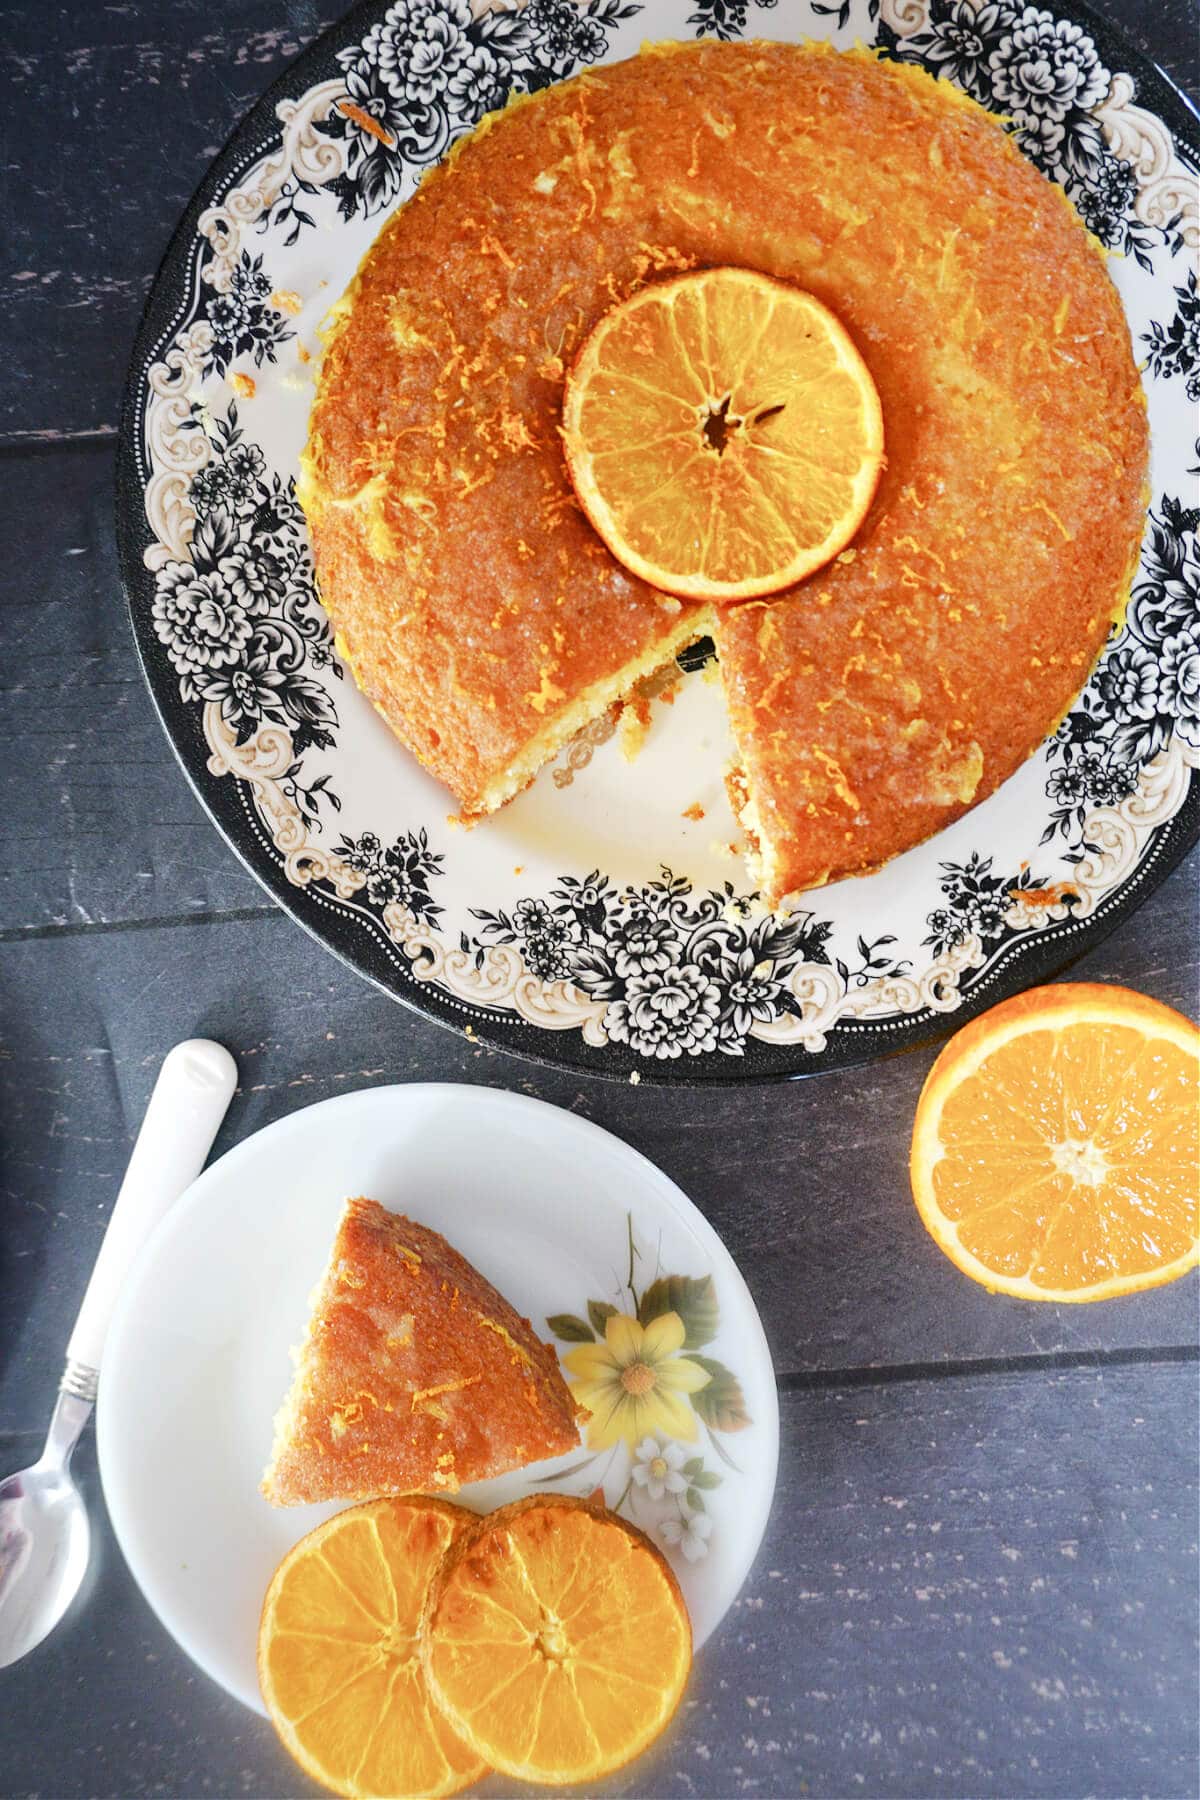 Overhead shot of a white dessert plate with a slice of orange drizzle cake and another larger plate with the rest of the cake topped with an orange slice